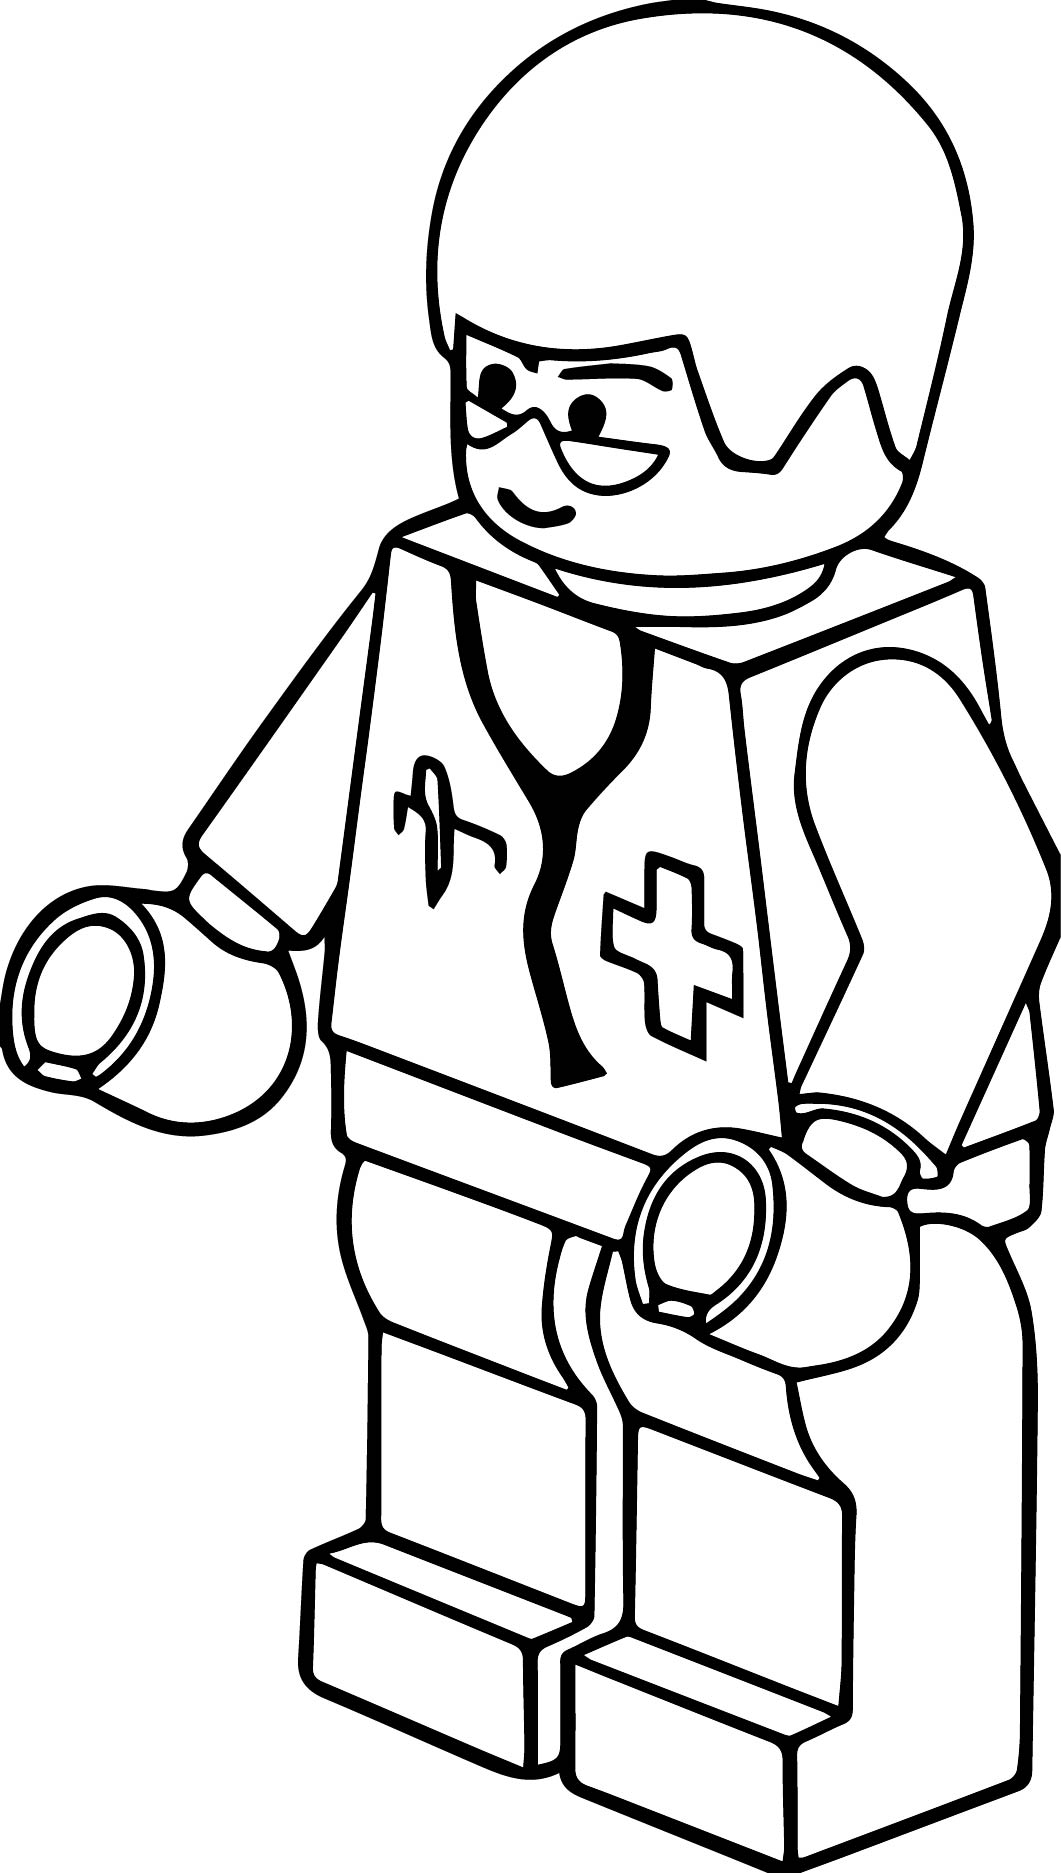 Lego clip art pitr lego town doctor coloring page wecoloringpage